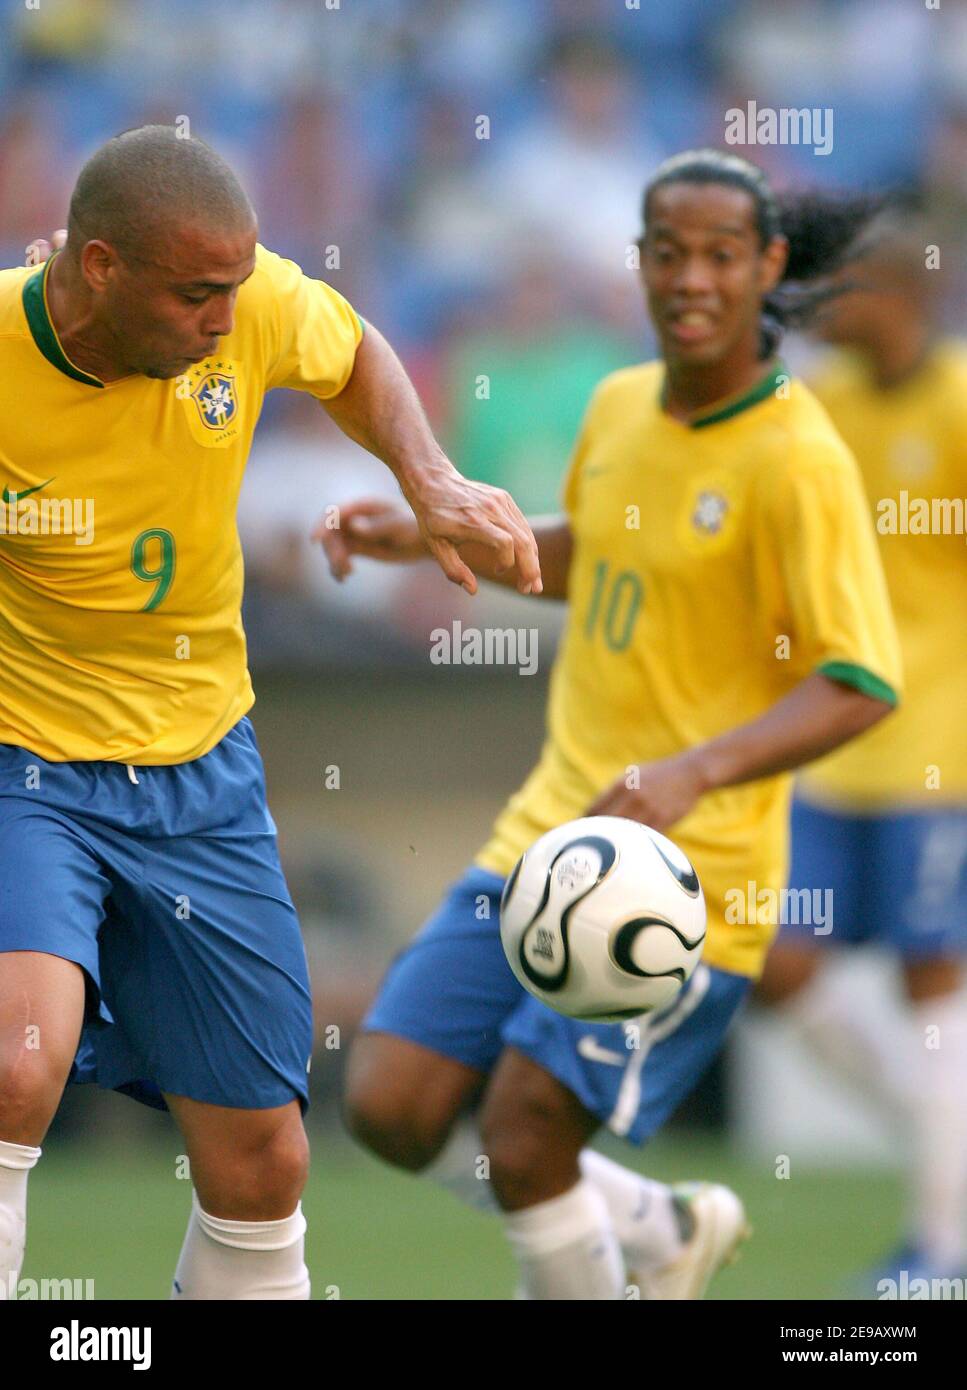 Brazil's Ronaldo and Ronaldinho during the World Cup 2006, Group F, Brazil vs Australia at the Allianz-Arena stadium in Munich, Germany on Une 18, 2006. Brazil won 2-0. Photo by Gouhier-Hahn-Orban/Cameleon/ABACAPRESS.COM Stock Photo